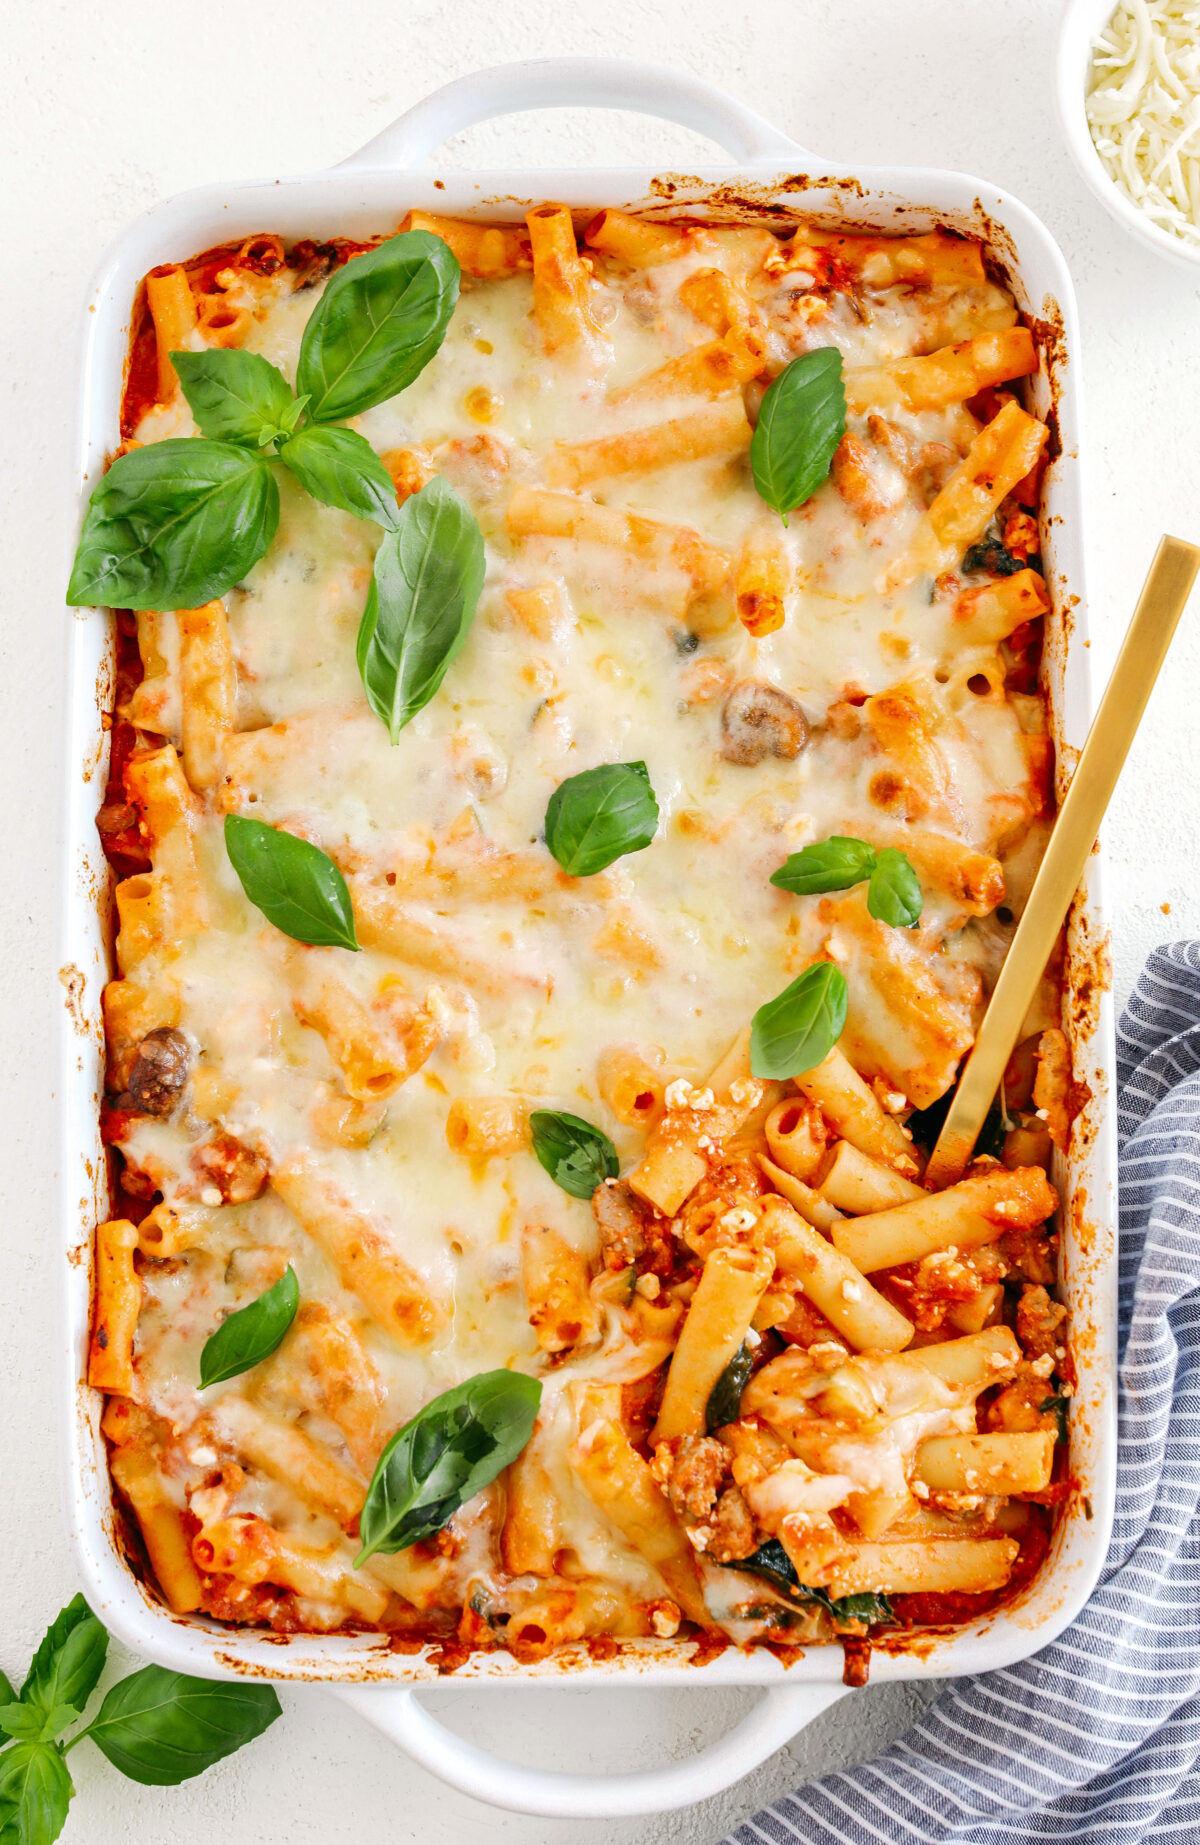 Comforting and delicious Healthy Baked Ziti packed with veggies, flavorful turkey sausage and makes the perfect weeknight meal the whole family will love!  Leftovers guaranteed!